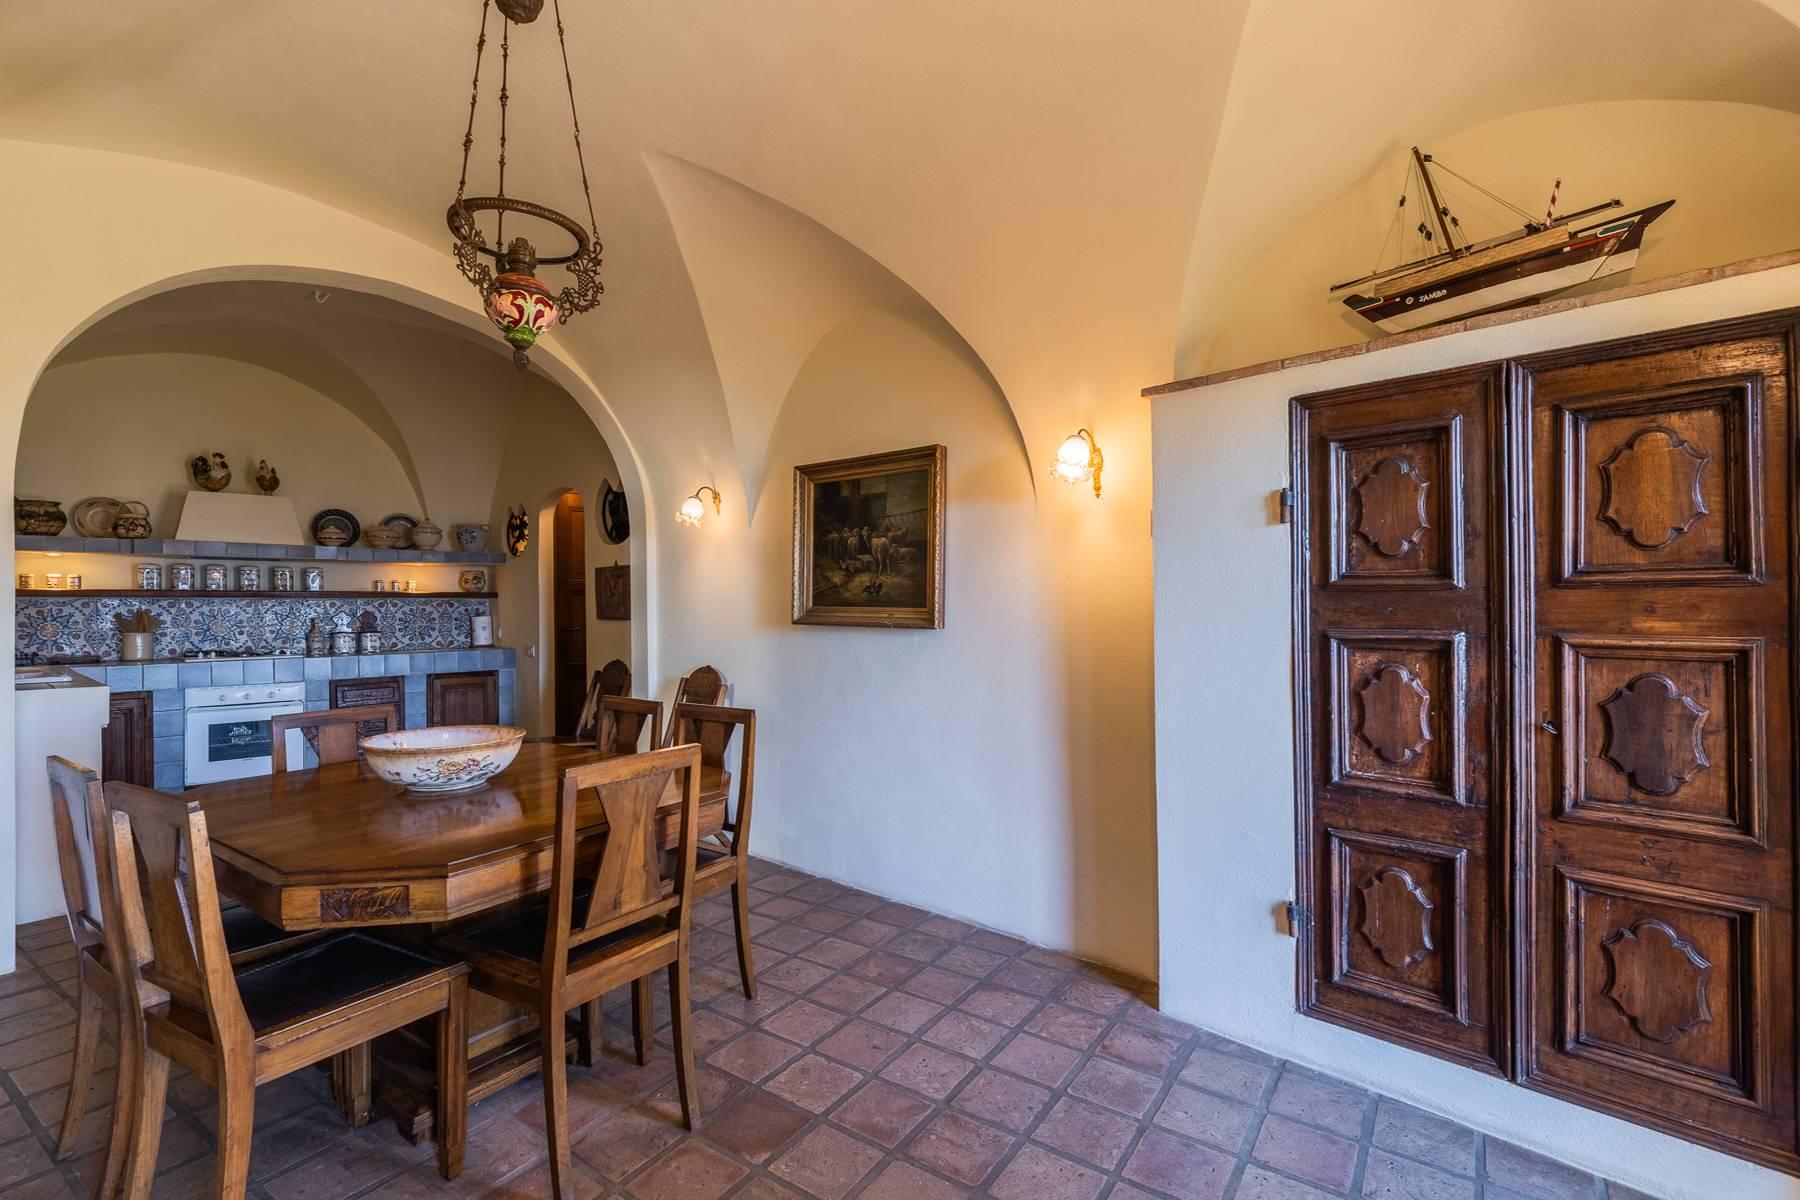 Charming villa in Torre Saracena, nestled in a tiny historic village overlooking Sanremo - Private Auction - 25